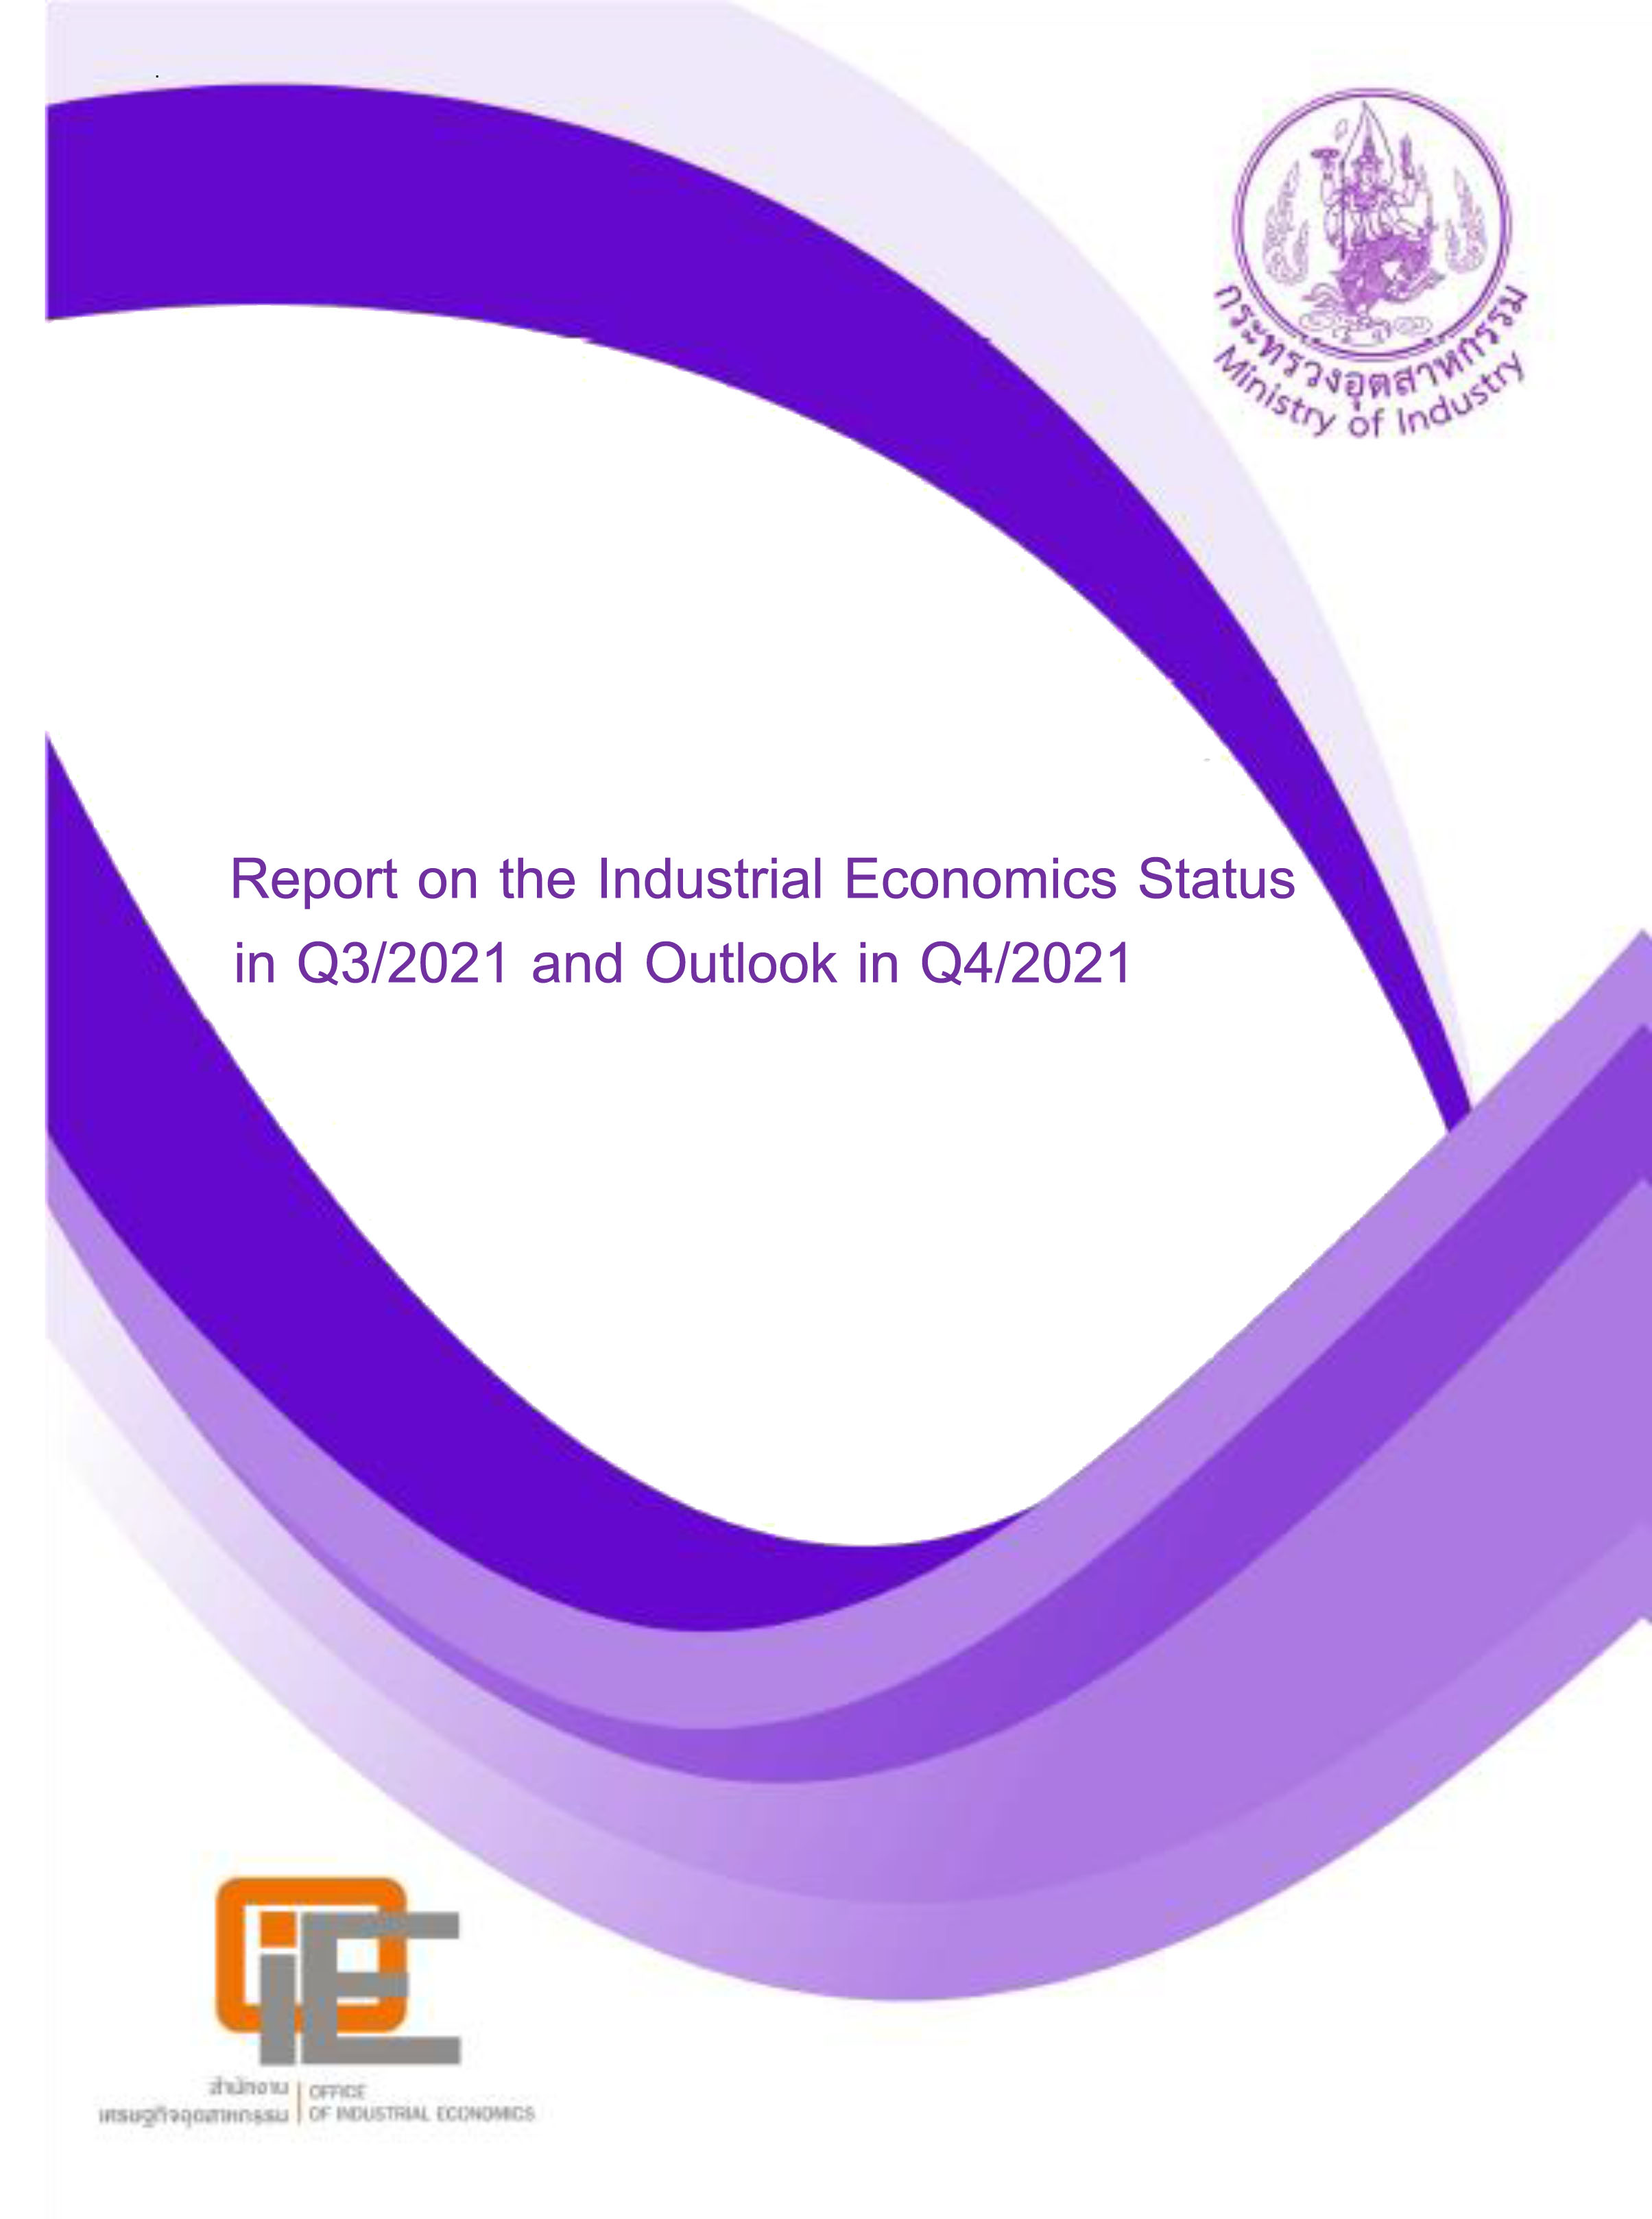 Report on the Industrial Economics Status in Q3/2021 and Outlook for Q4/2021